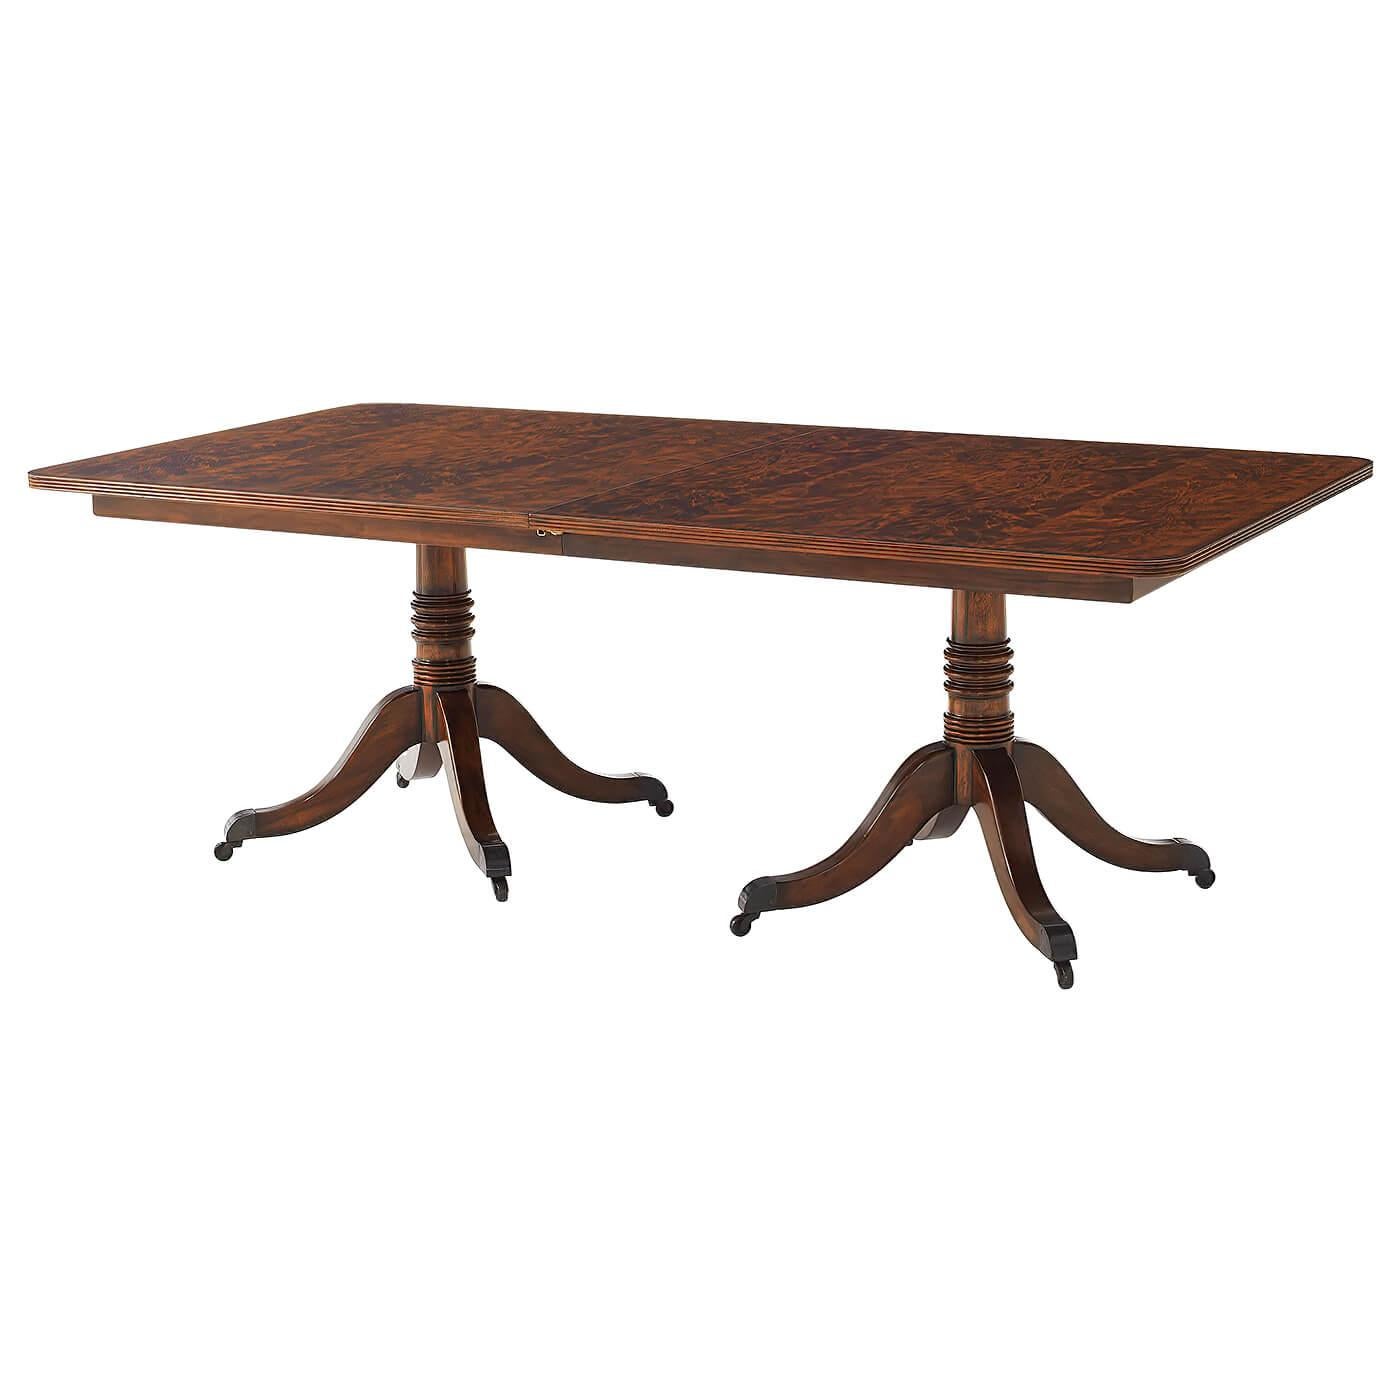 A mahogany veneer and solid twin pedestal extending dining table, the crossbanded reeded edge top with rounded corners opening to accommodate a matching leaf, above a banded frieze on two gun barrel turned columns each terminating in four downswept